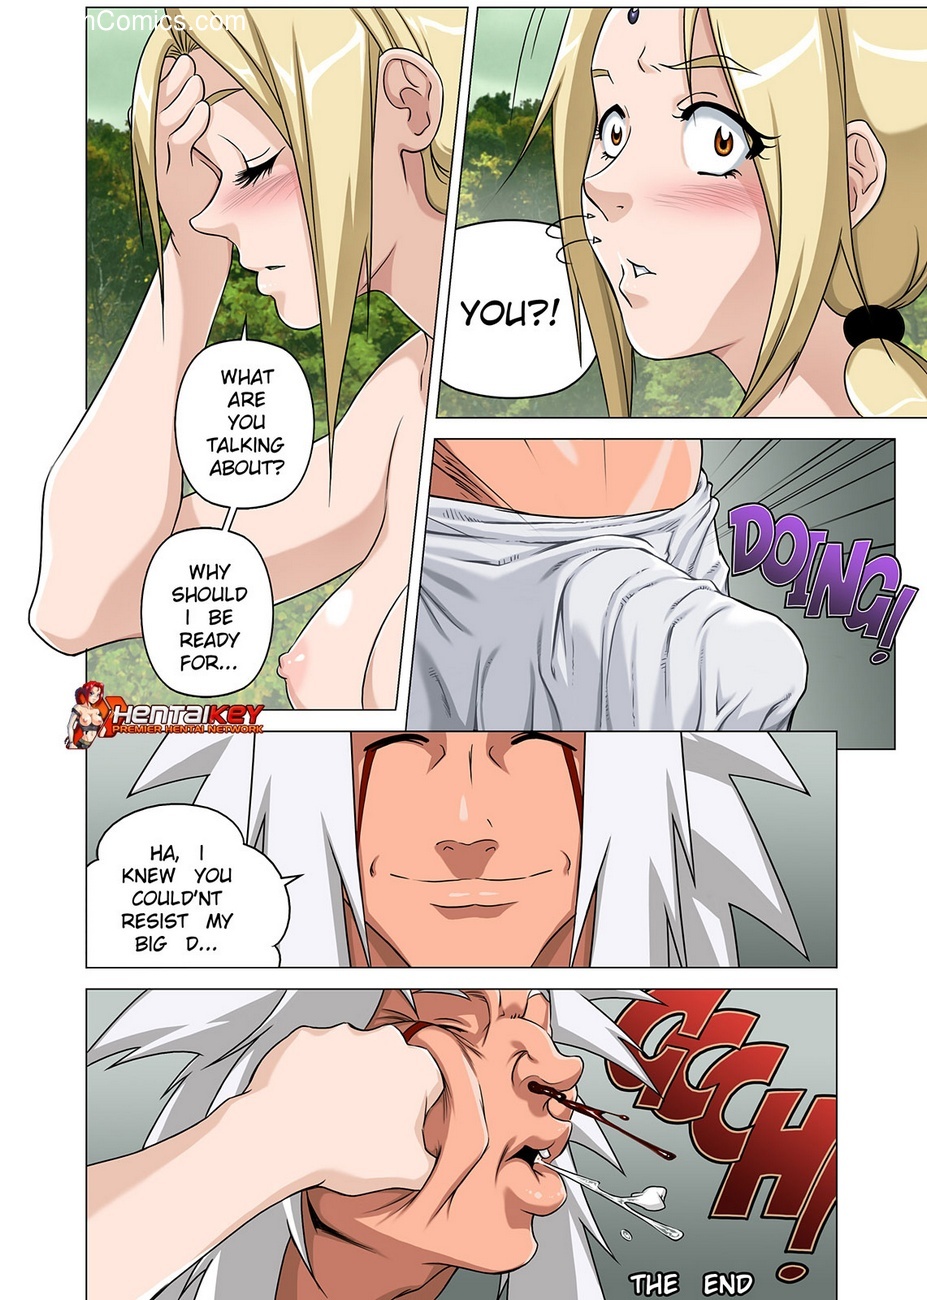 Tsunade naked comic with big words